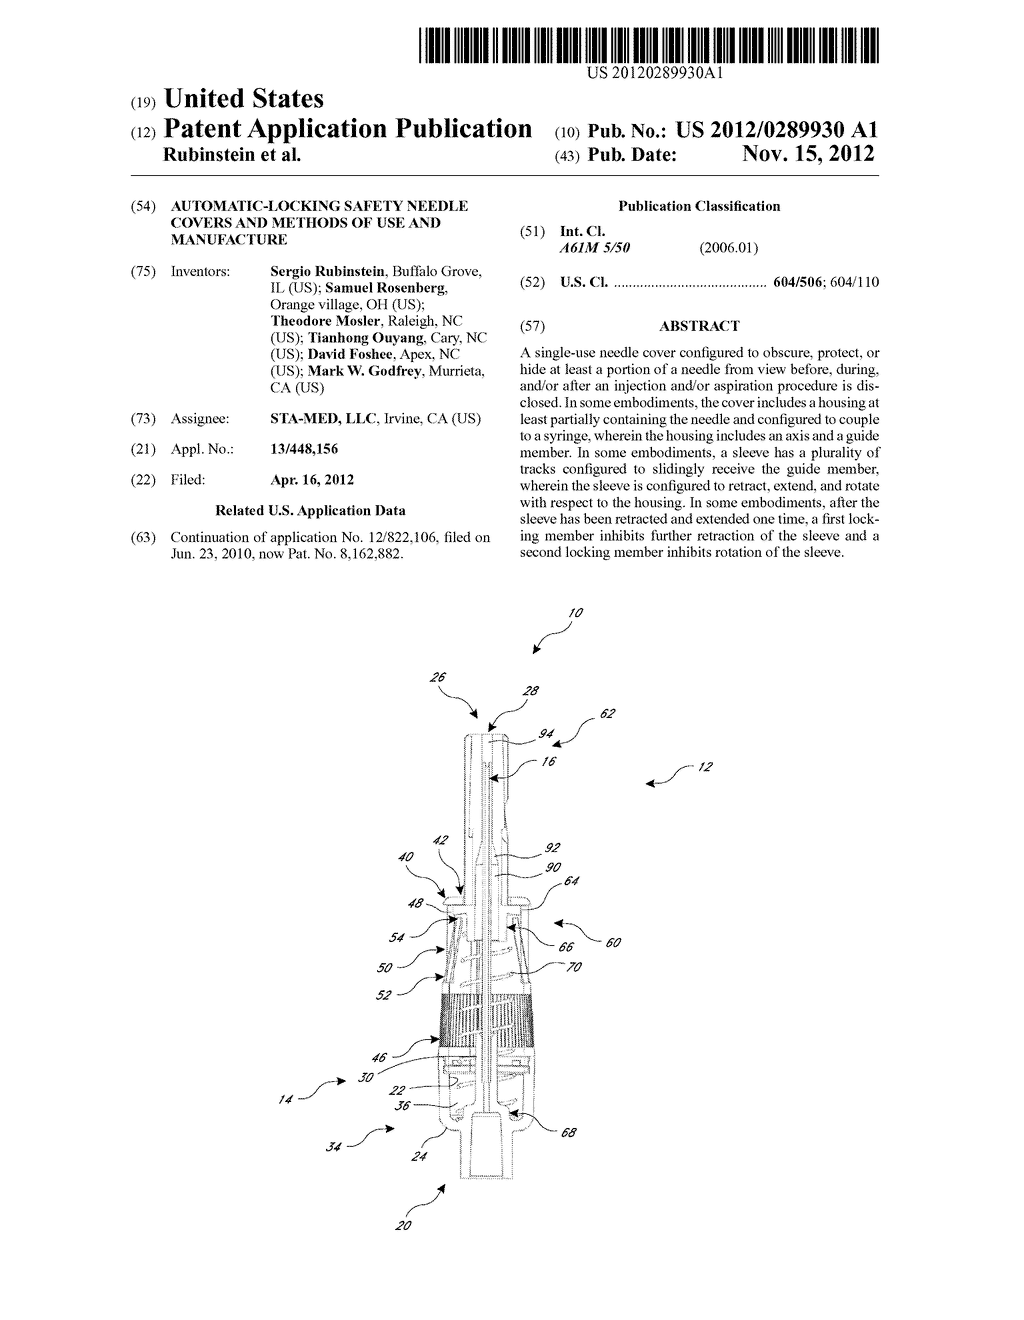 AUTOMATIC-LOCKING SAFETY NEEDLE COVERS AND METHODS OF USE AND MANUFACTURE - diagram, schematic, and image 01